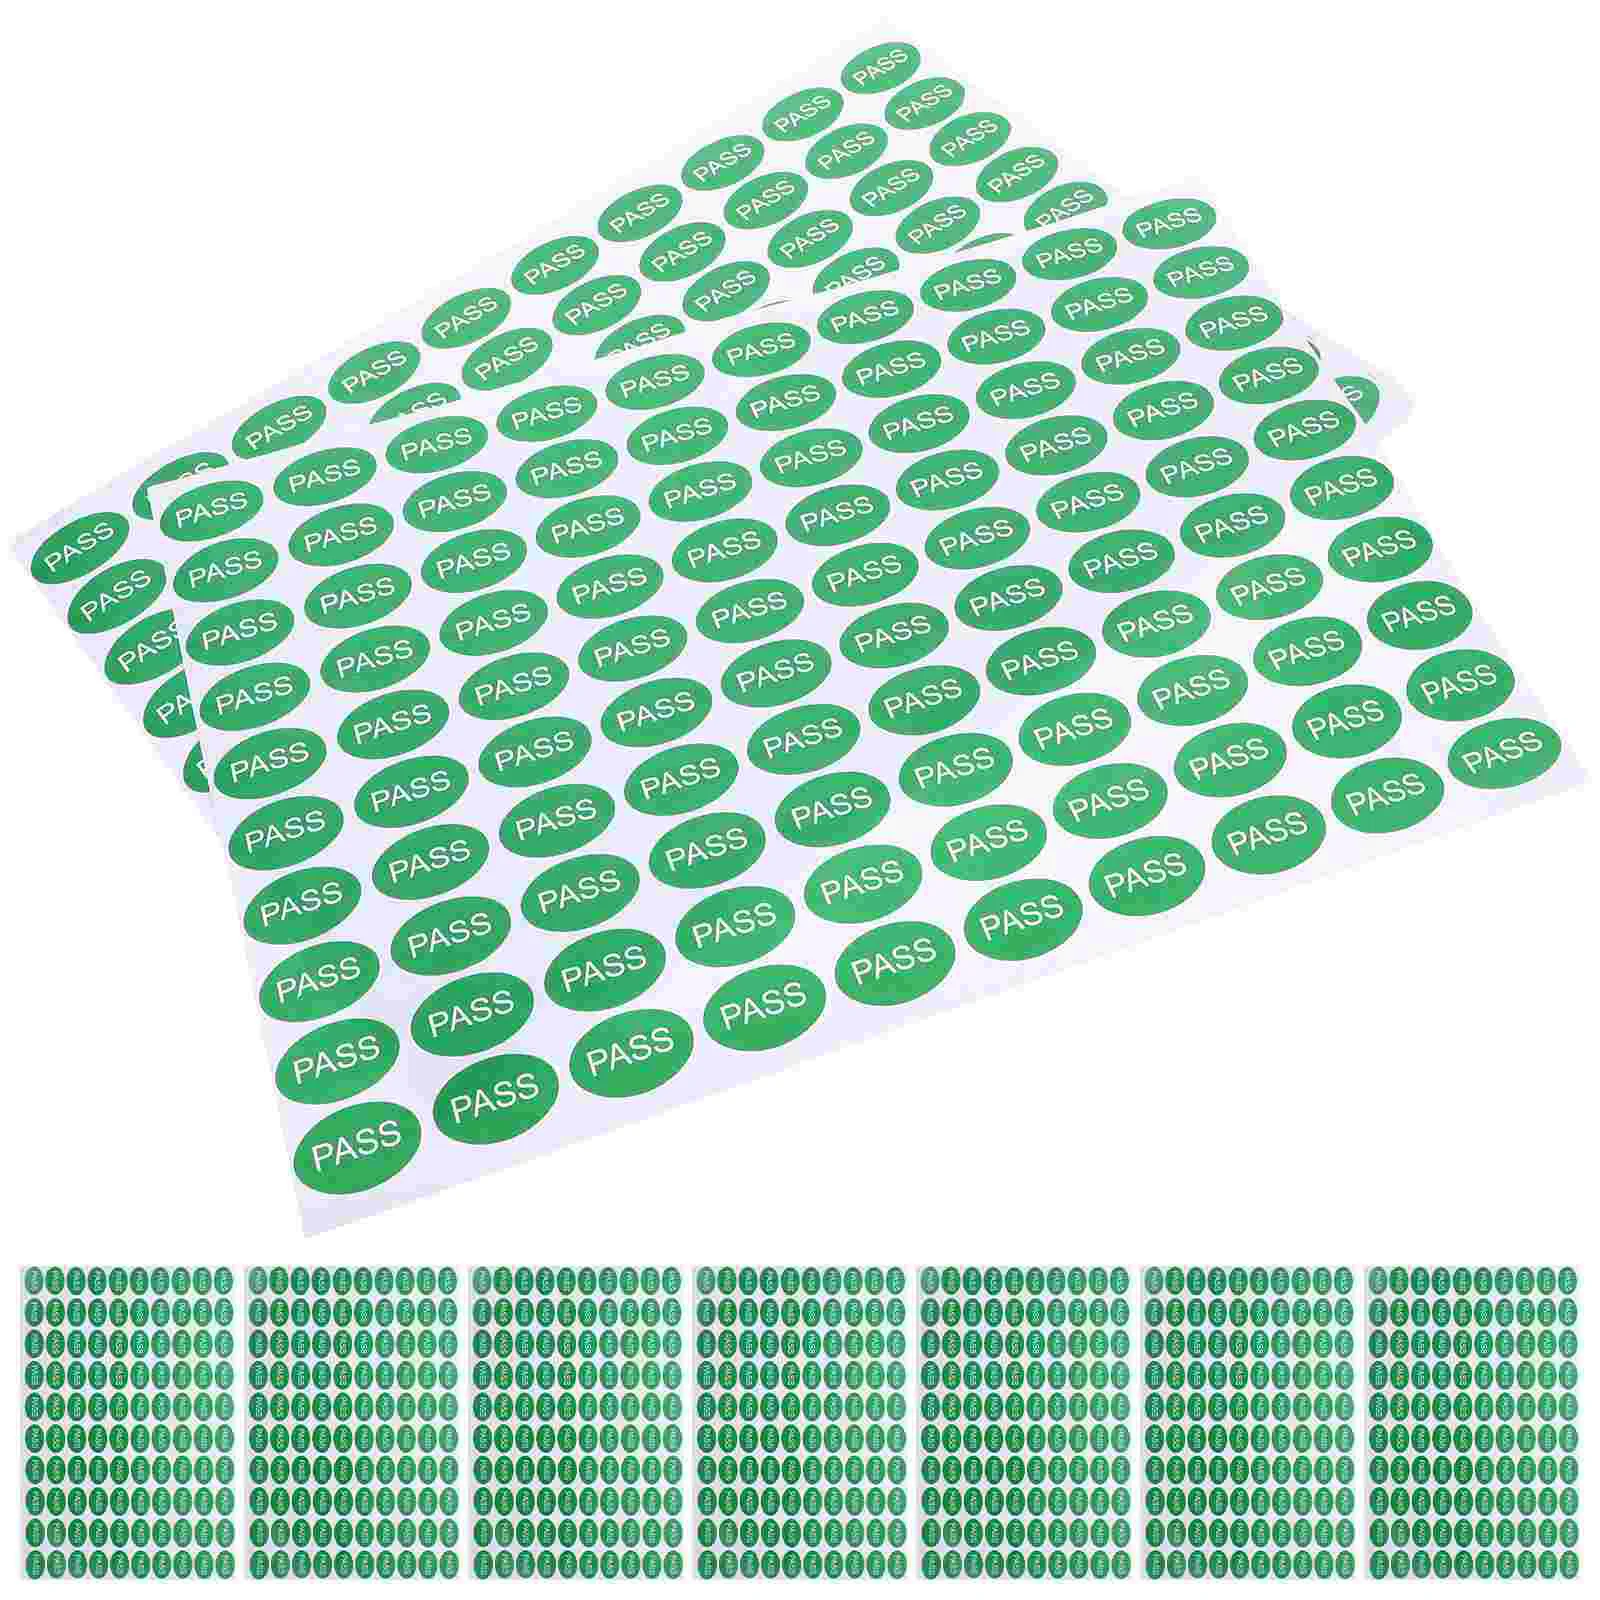 

2000 Pcs Oval Green Qc Pass Inspection Label Sticker Color Passed Stickers Stickers Coated Paper Self-adhesive (strong Adhesive)